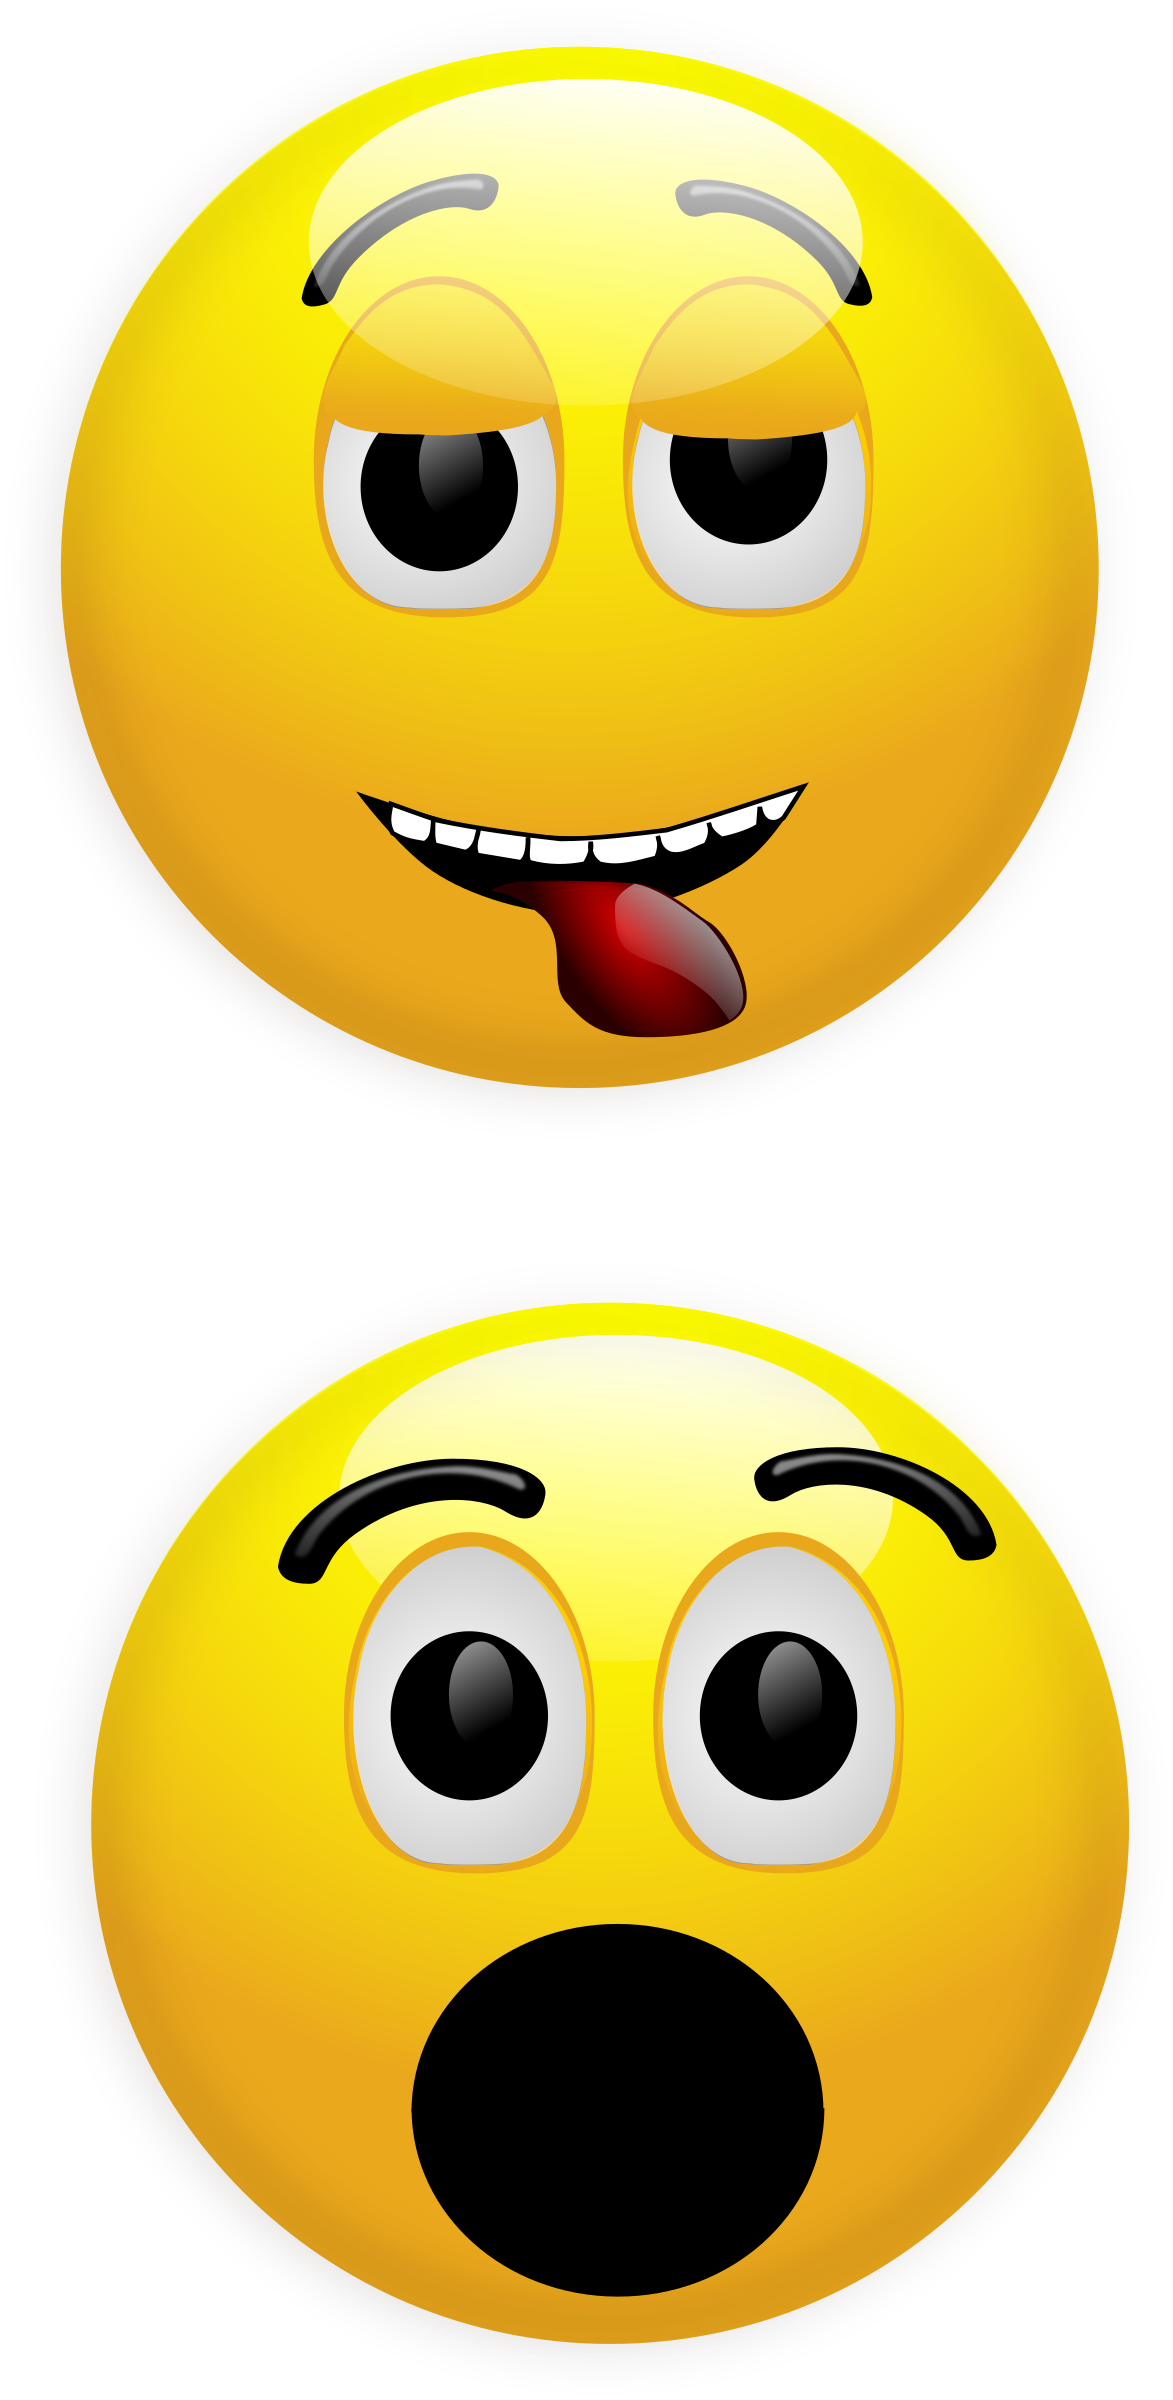 ms office clipart smiley - photo #21